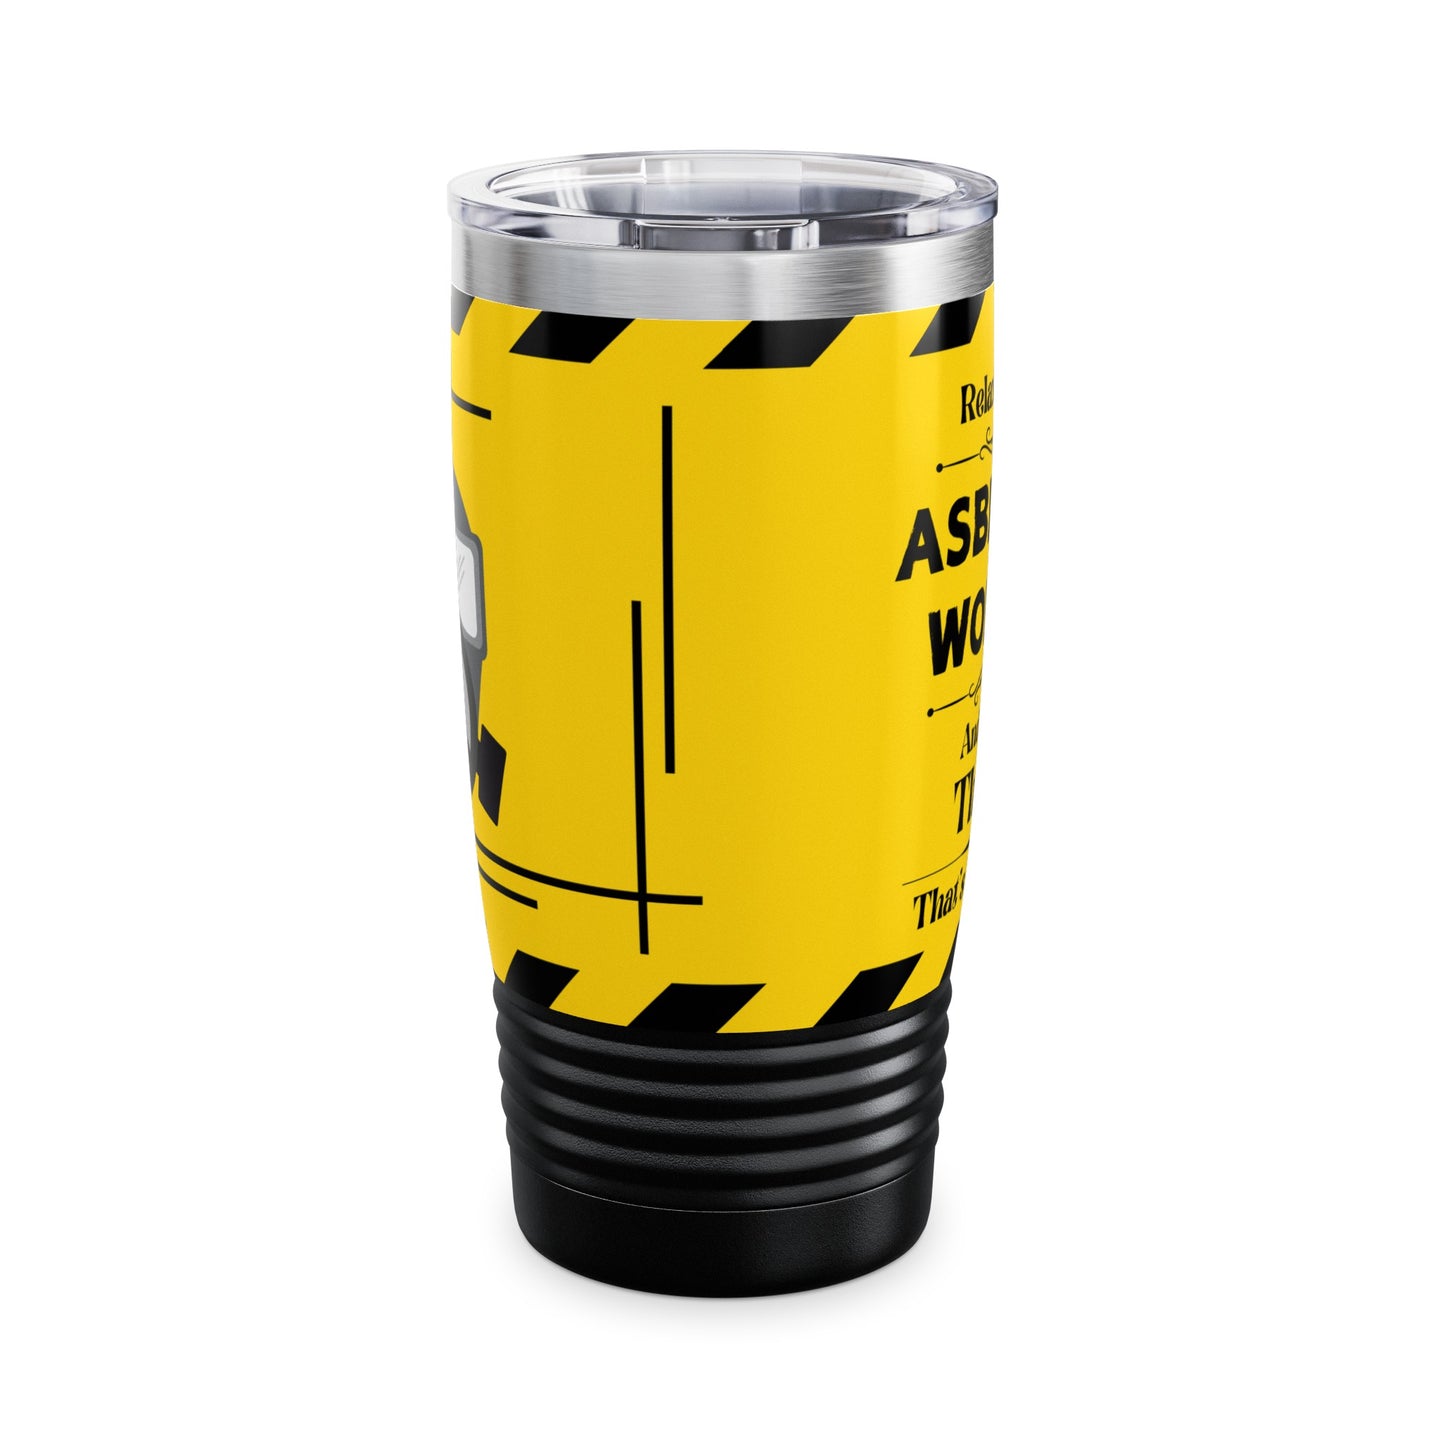 Relax, I'm An ASBESTOS WORKER, And I Know Things - Ringneck Tumbler, 20oz